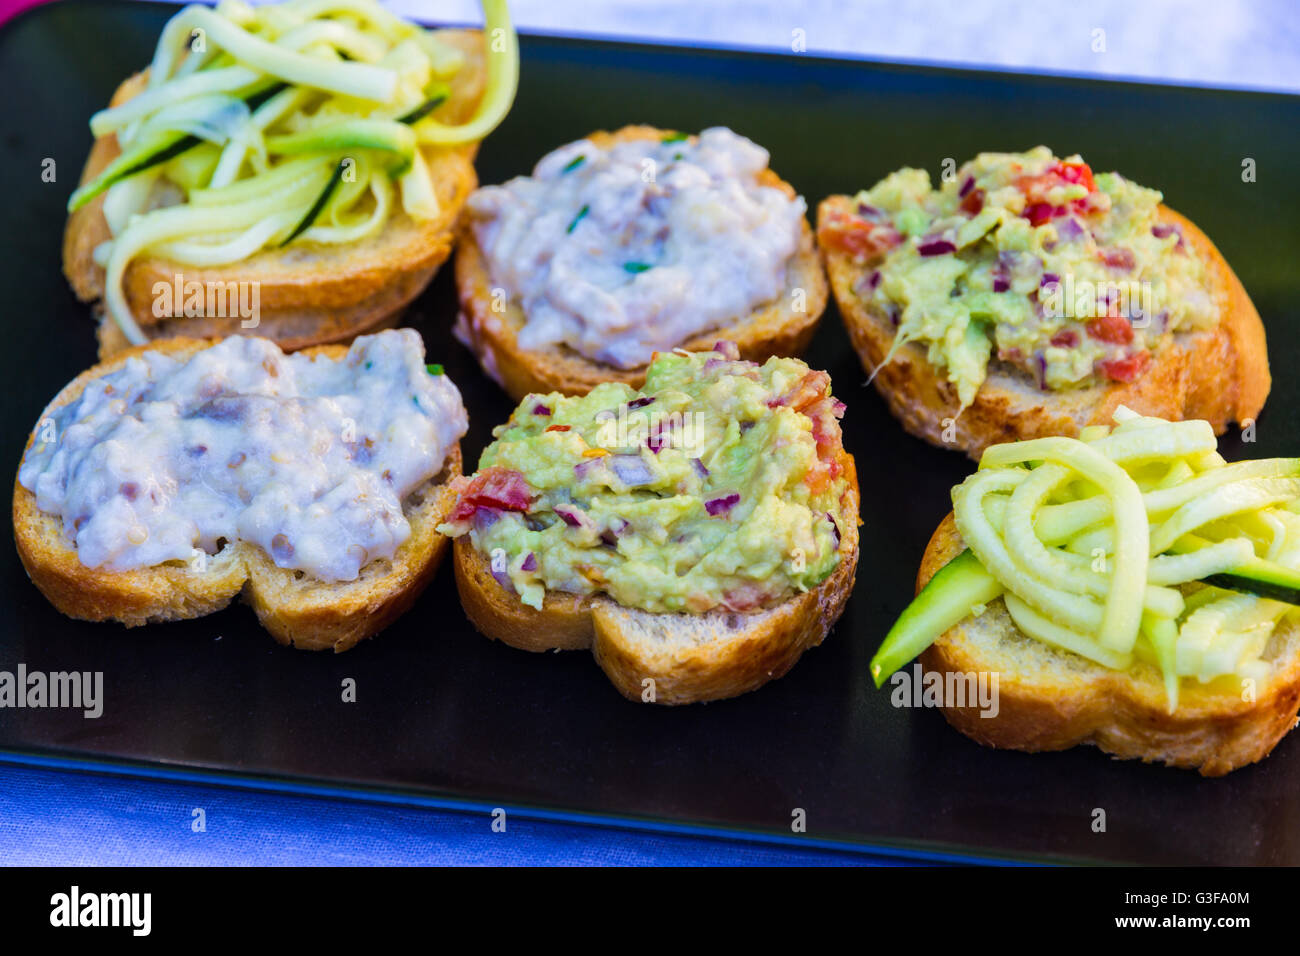 Courgette salad, guacamole and aubergine dip on bread. Cicchetti from Venice Italy, similar to bruschetta or tapas. Stock Photo